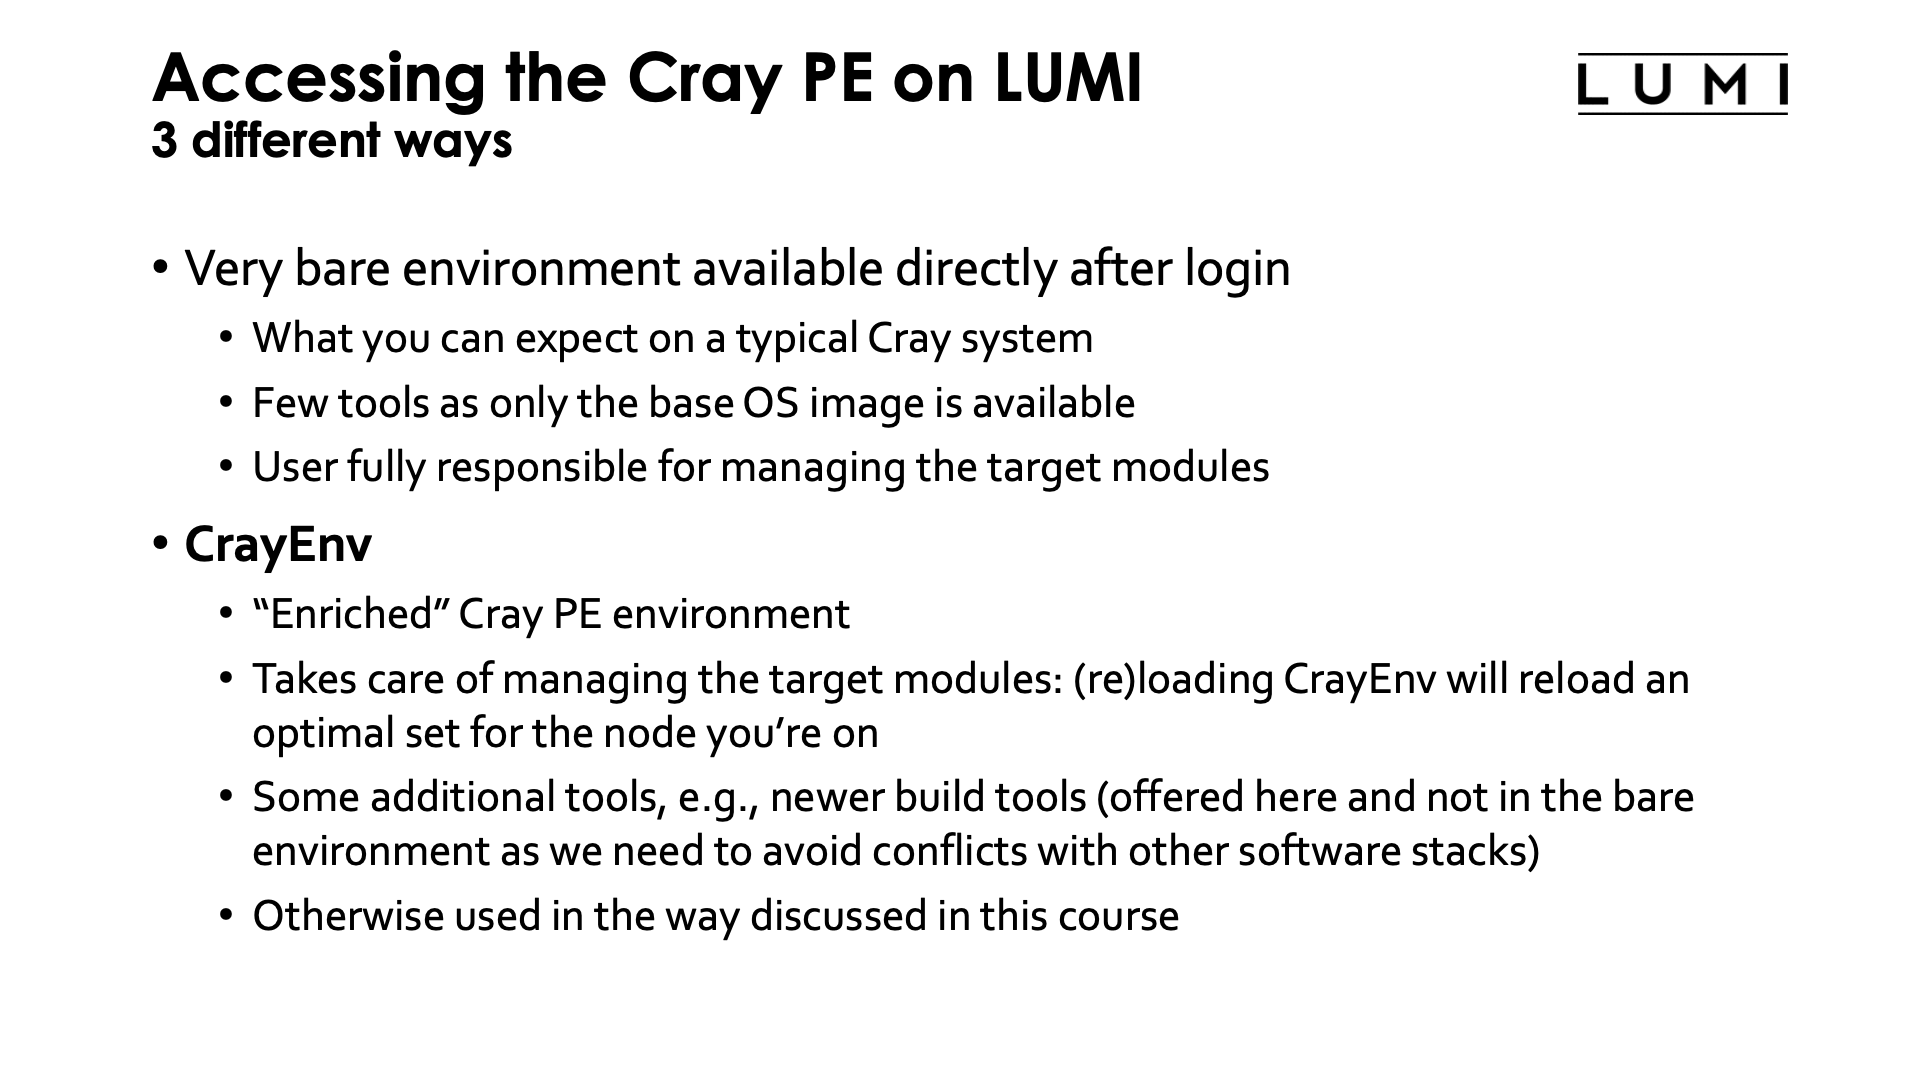 Accessing the Cray PE: BAre and CrayEnv